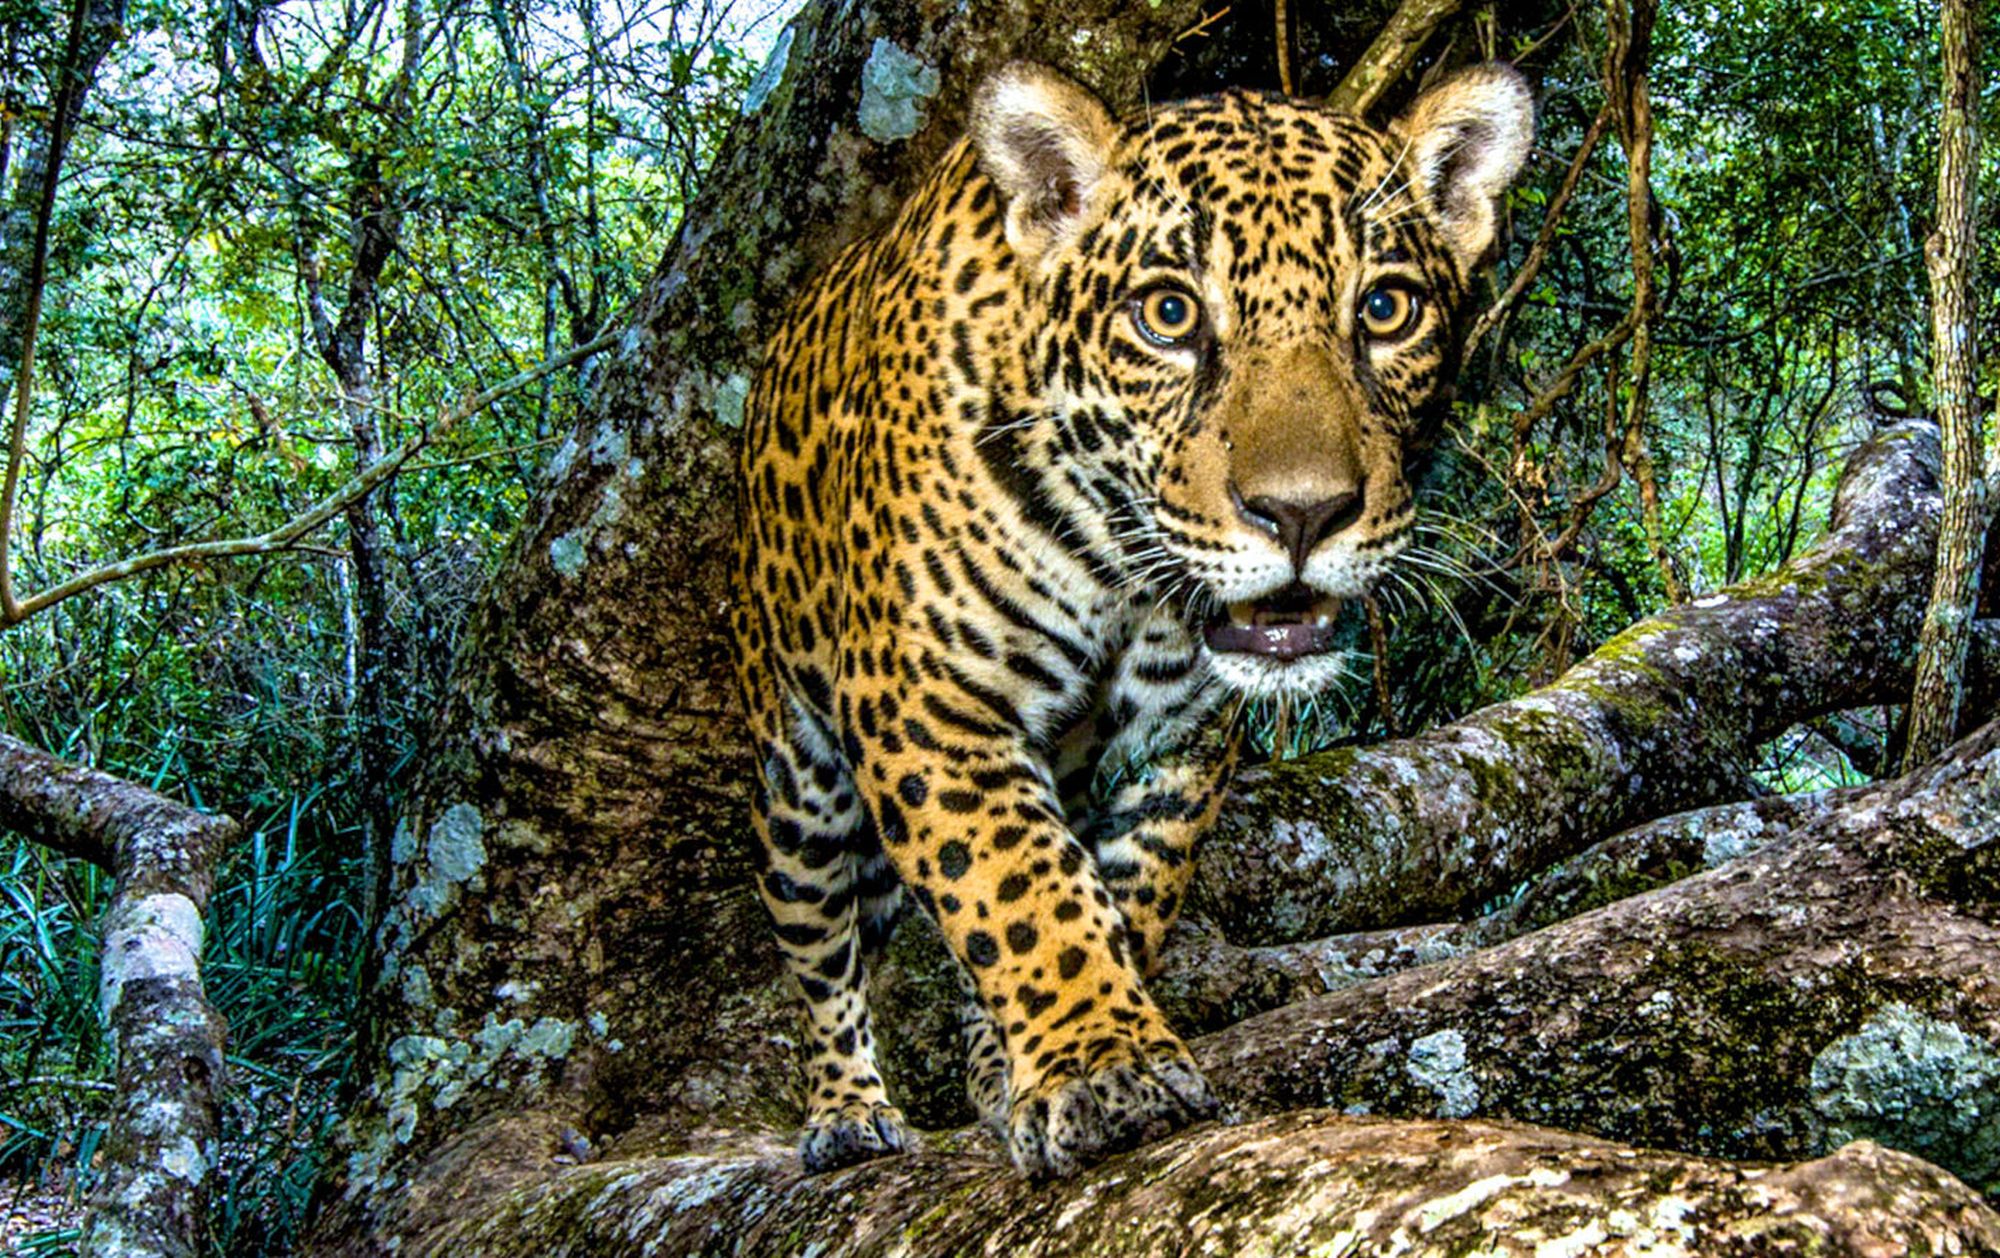 Wildfires disproportionately affected jaguars in the Pantanal